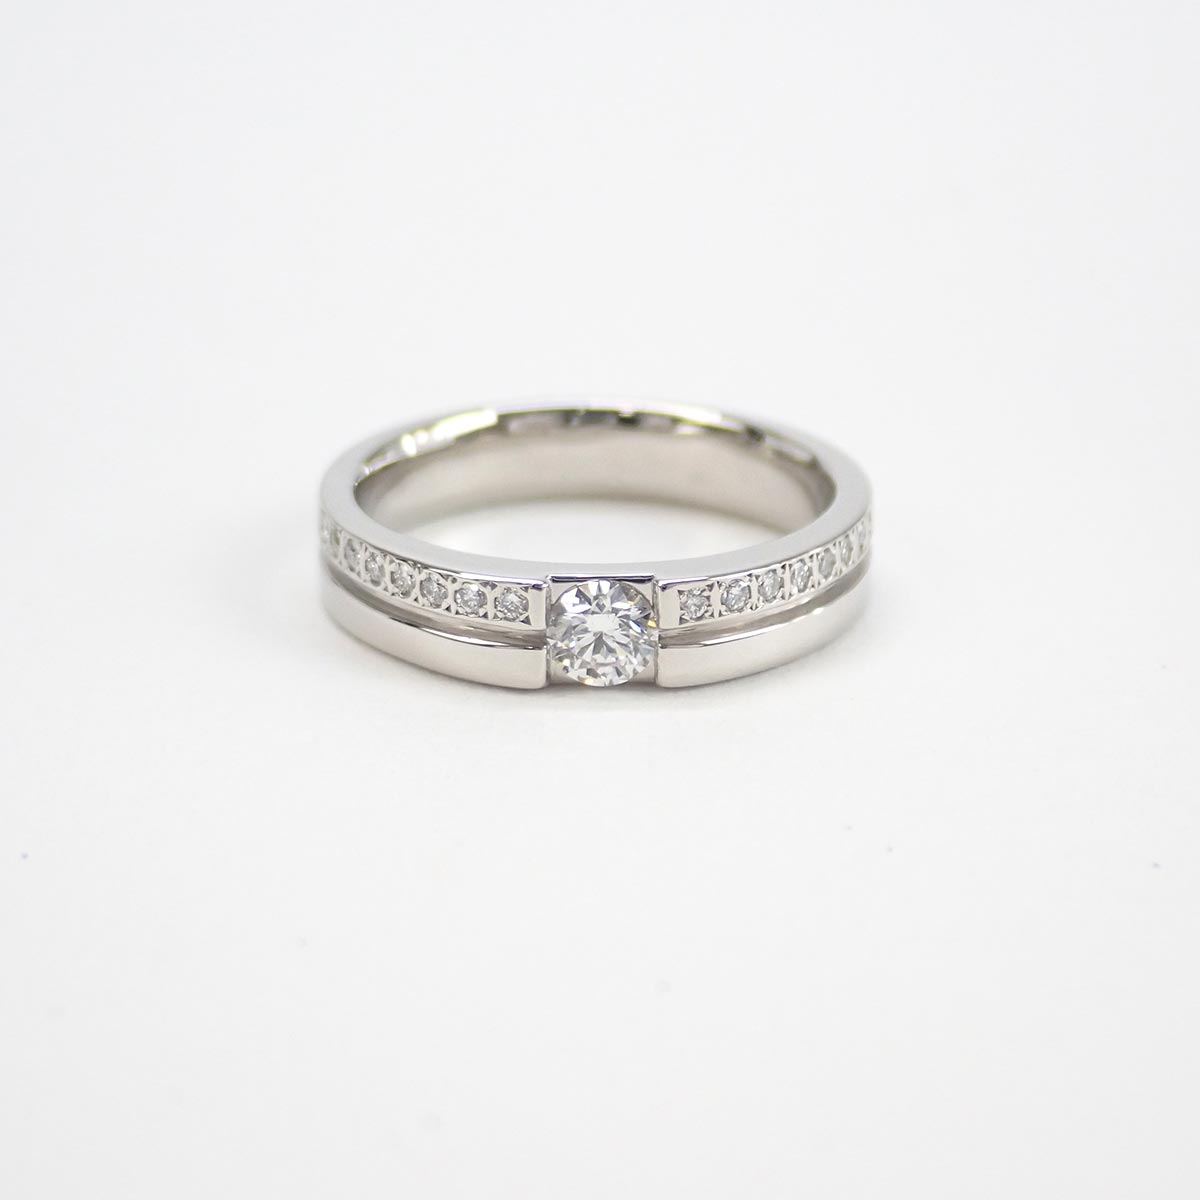 4℃ Design D0.171ct, approx. Gauge 9.5 Ring - PT1000 with Diamond, 9.5 Silver For Women【Pre-Owned】